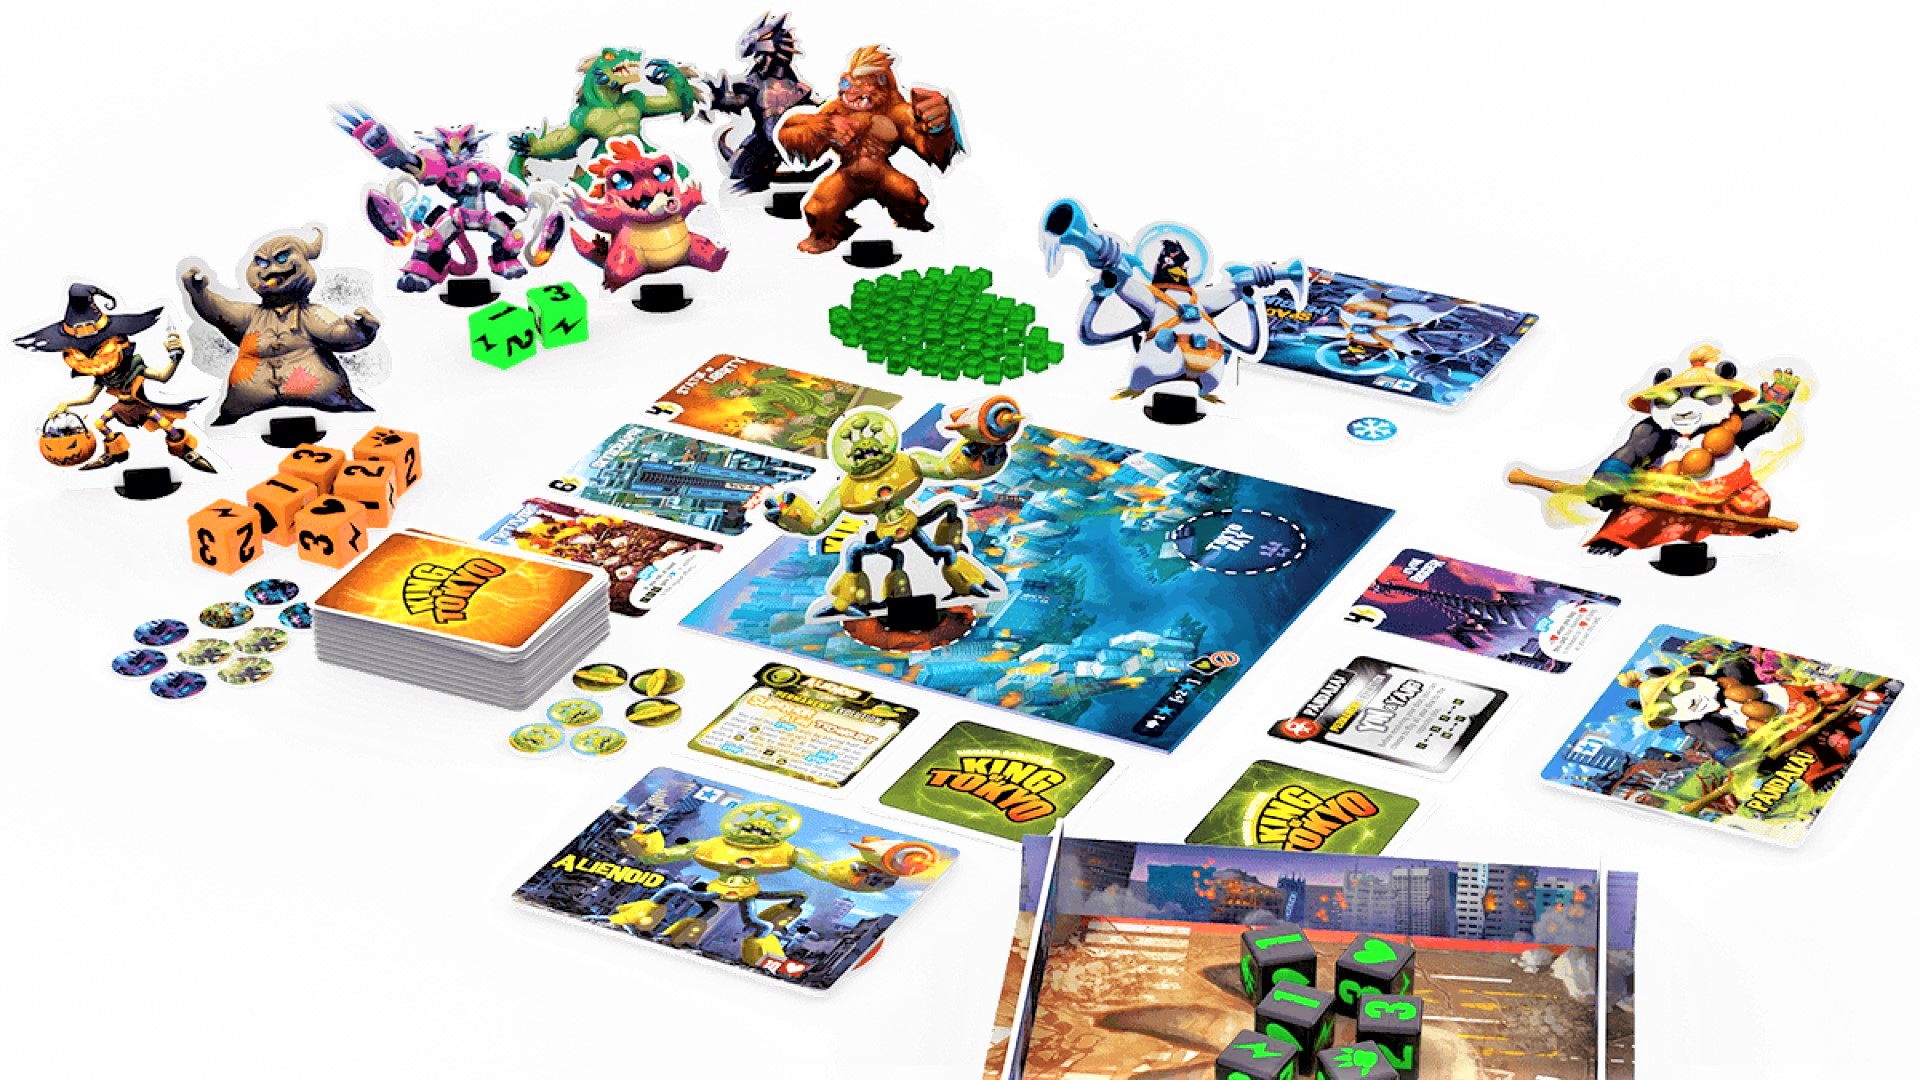 The Monster at the End of this Review: A King of Tokyo Monster Box